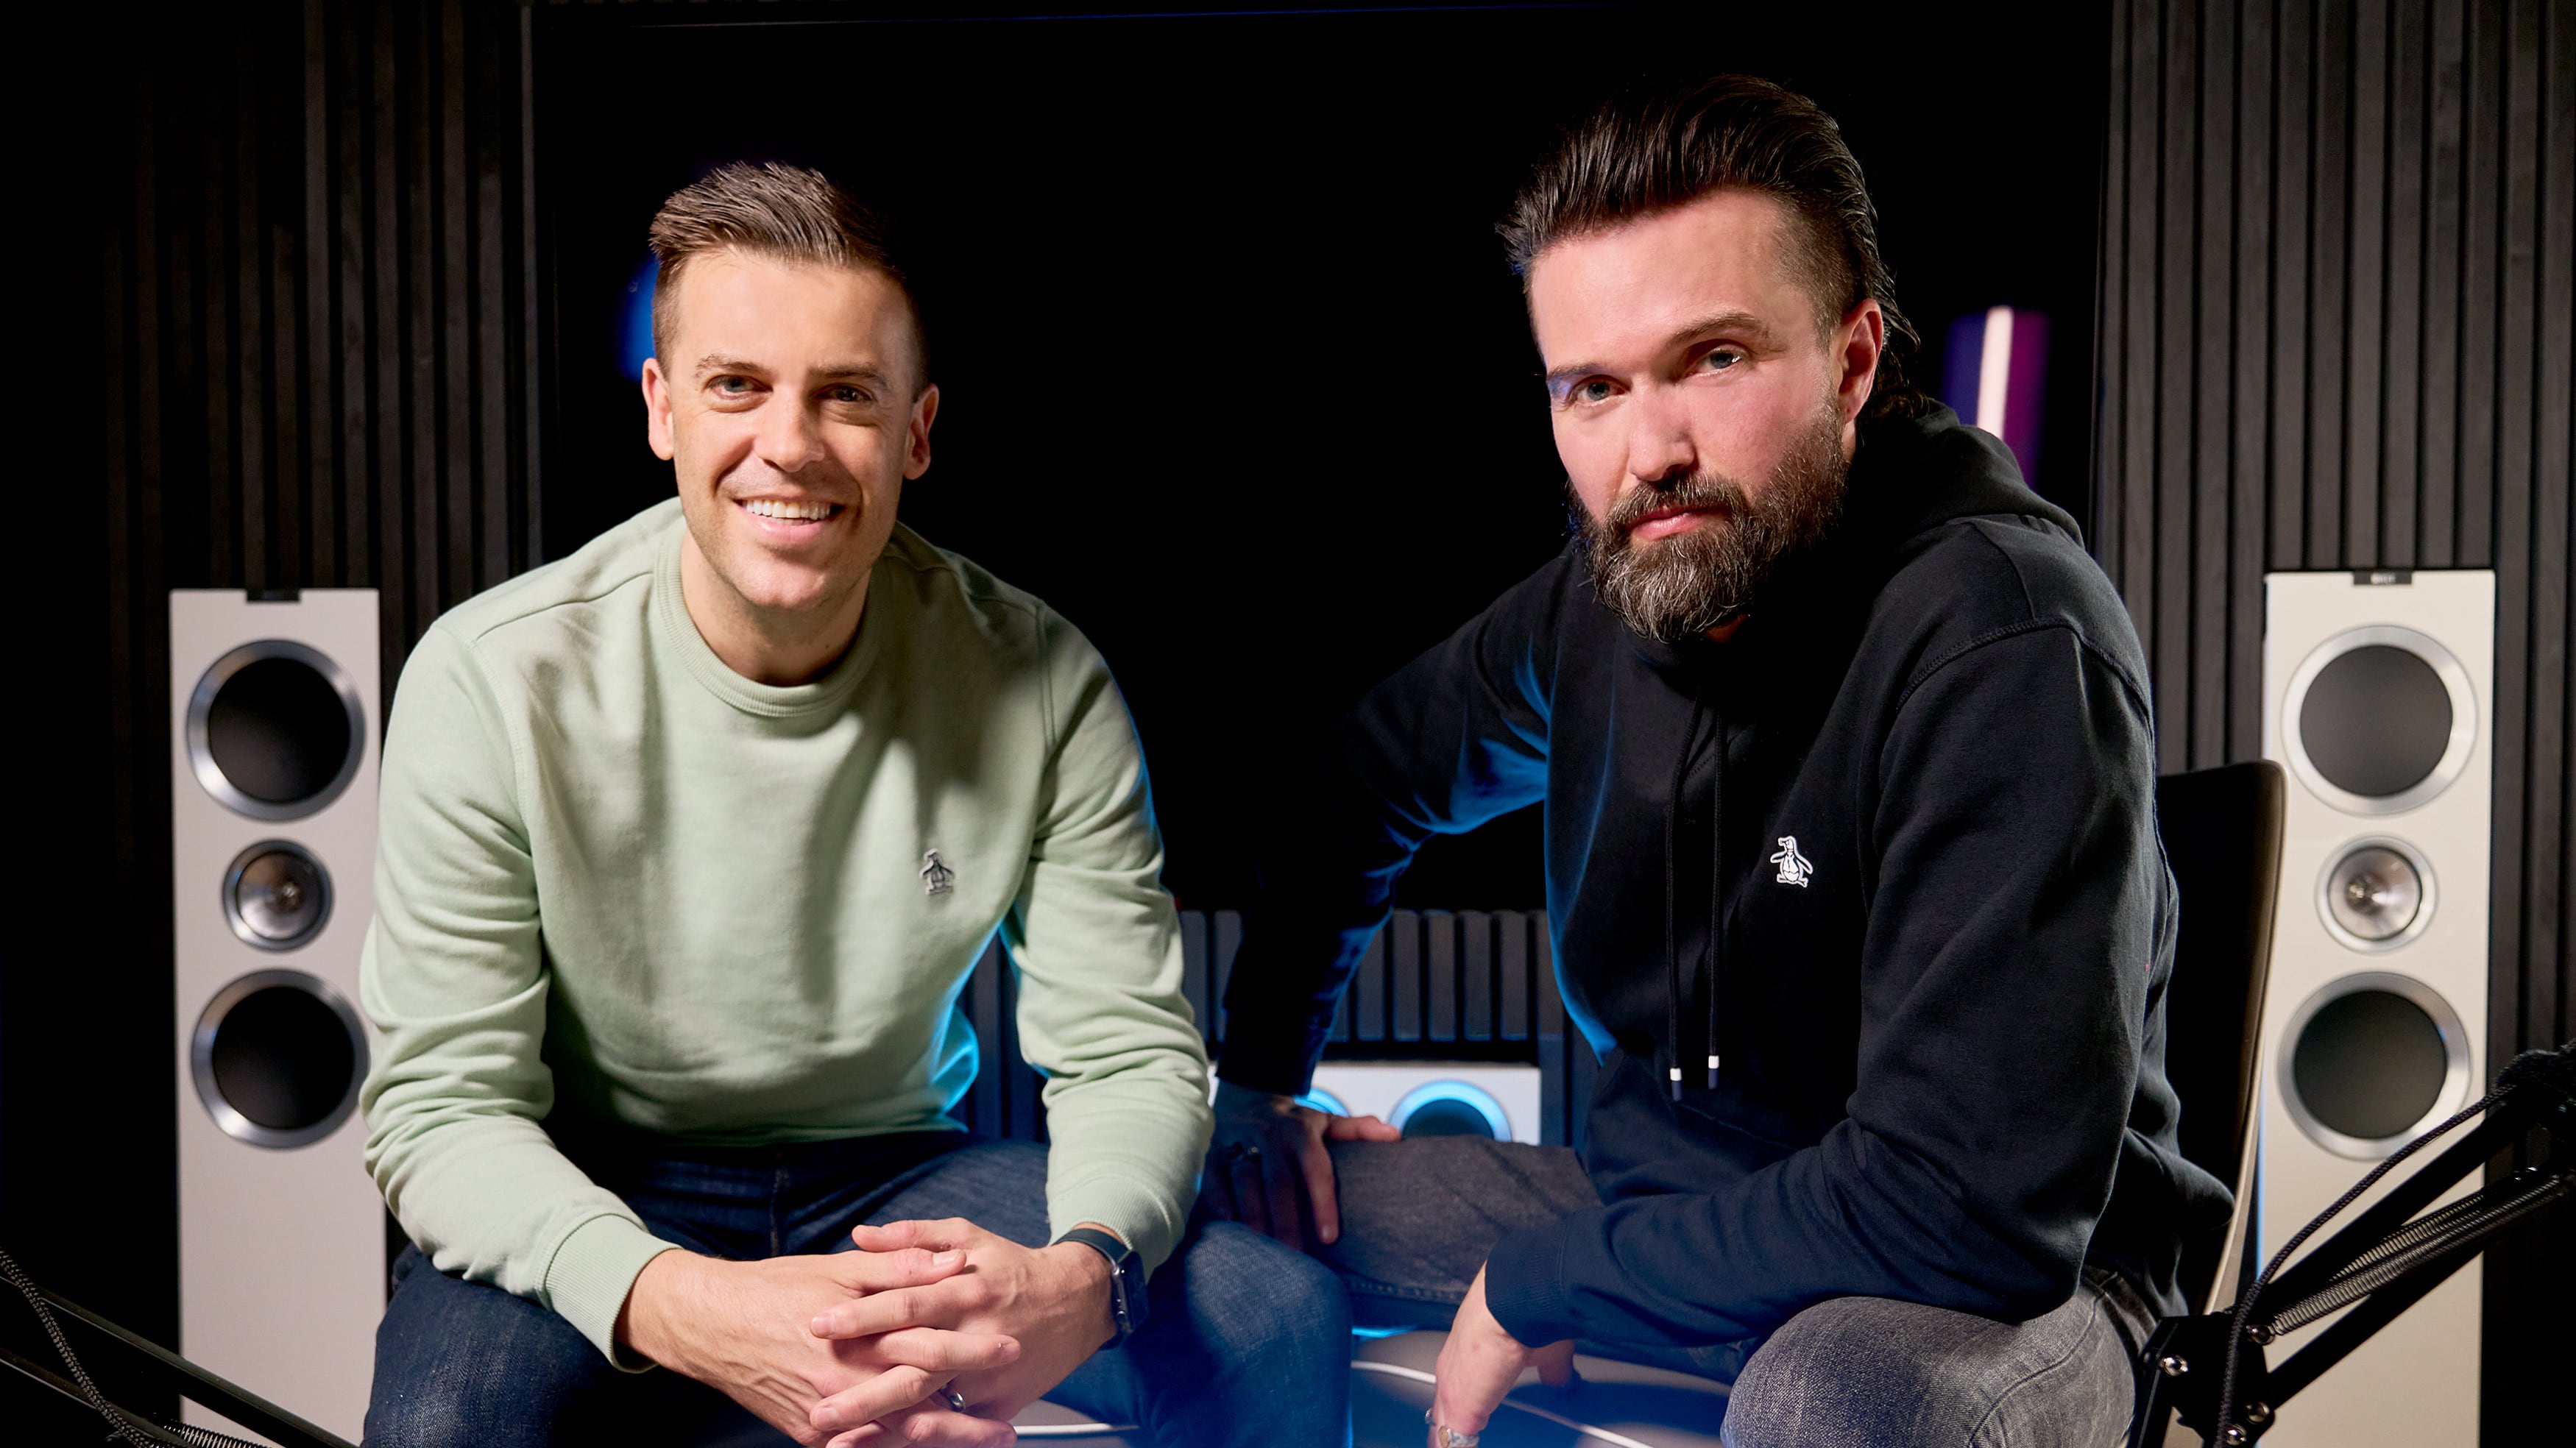 Emmett Scanlan speaking about baby loss through miscarriage, on the Original Penguin X Campaign Against Living Miserably Under The Surface Podcast.